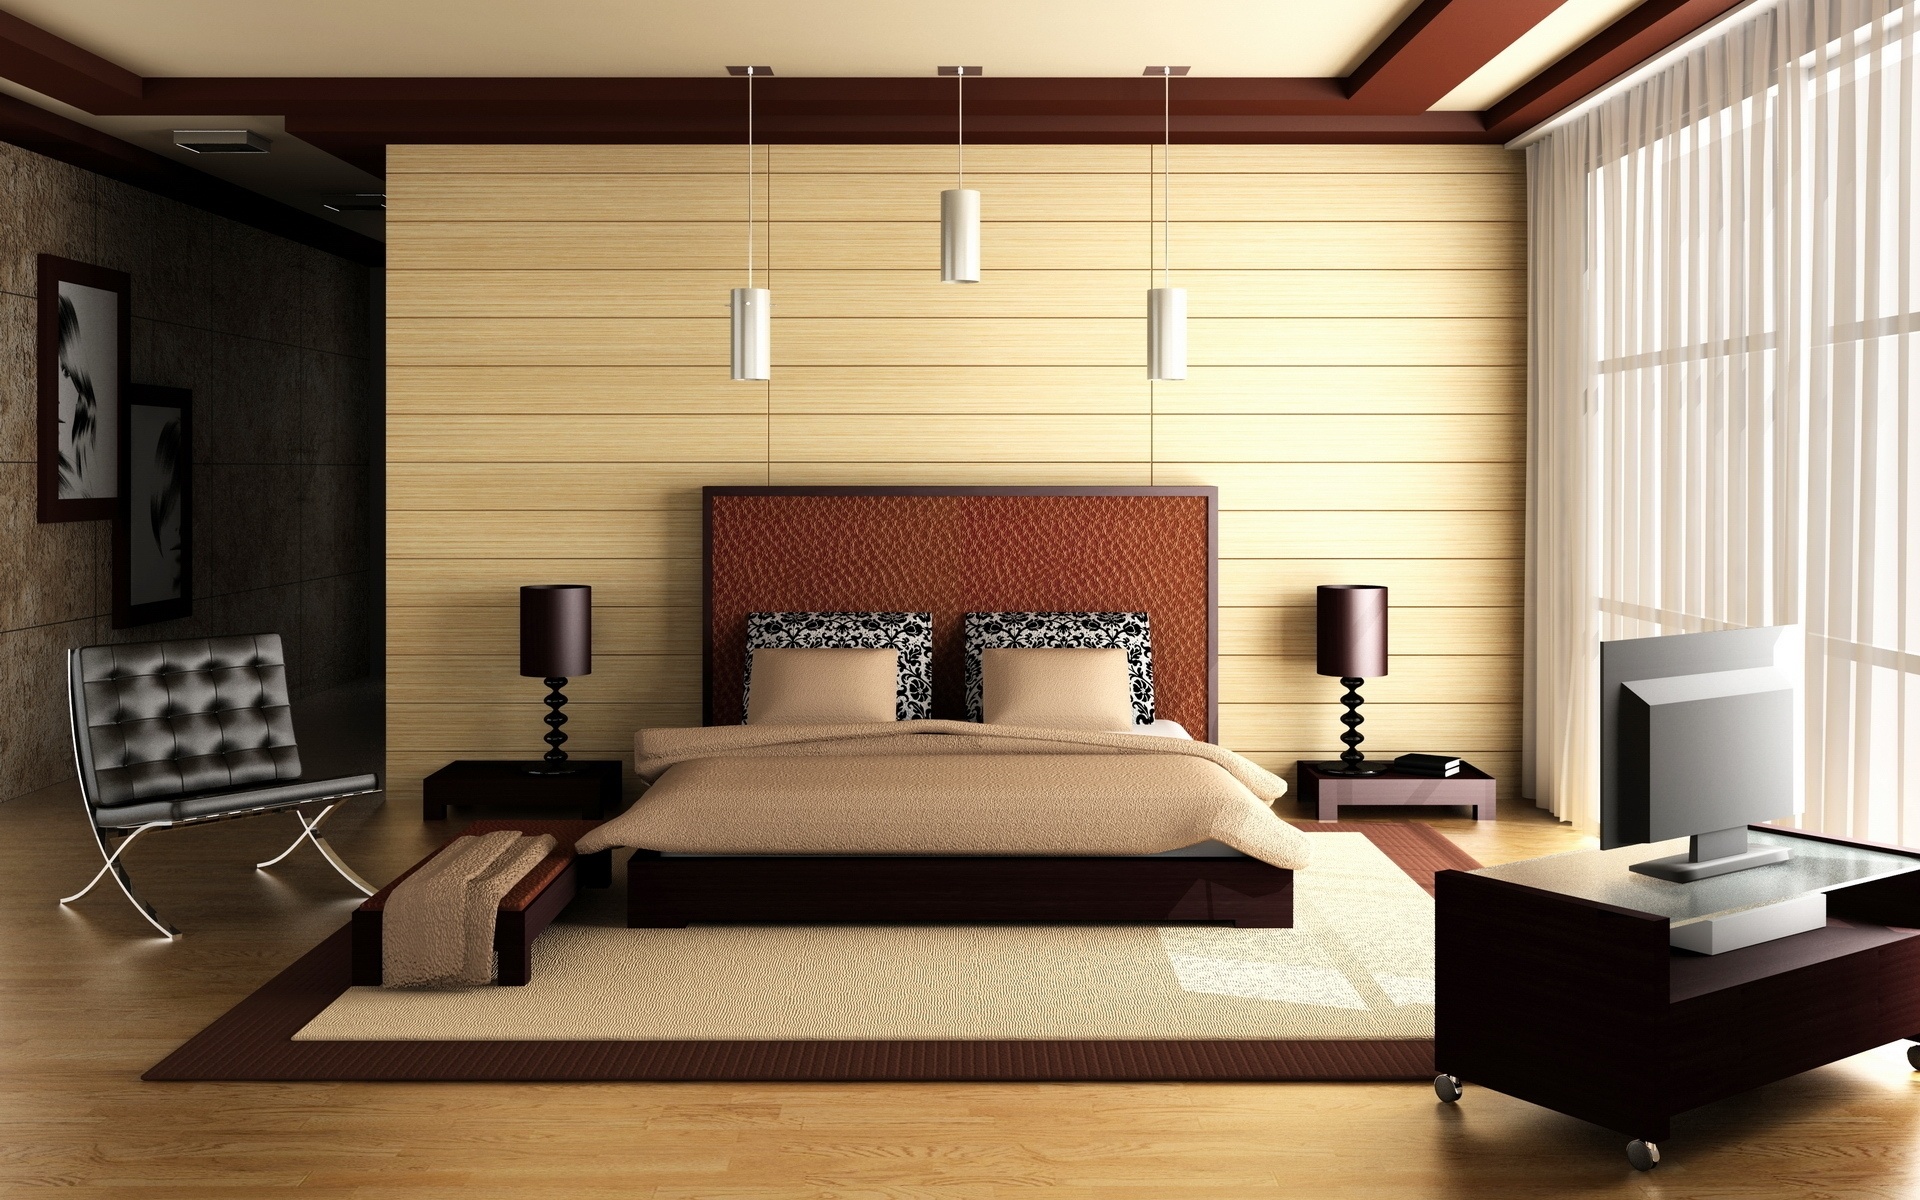 PC Wallpapers room, man made, bedroom